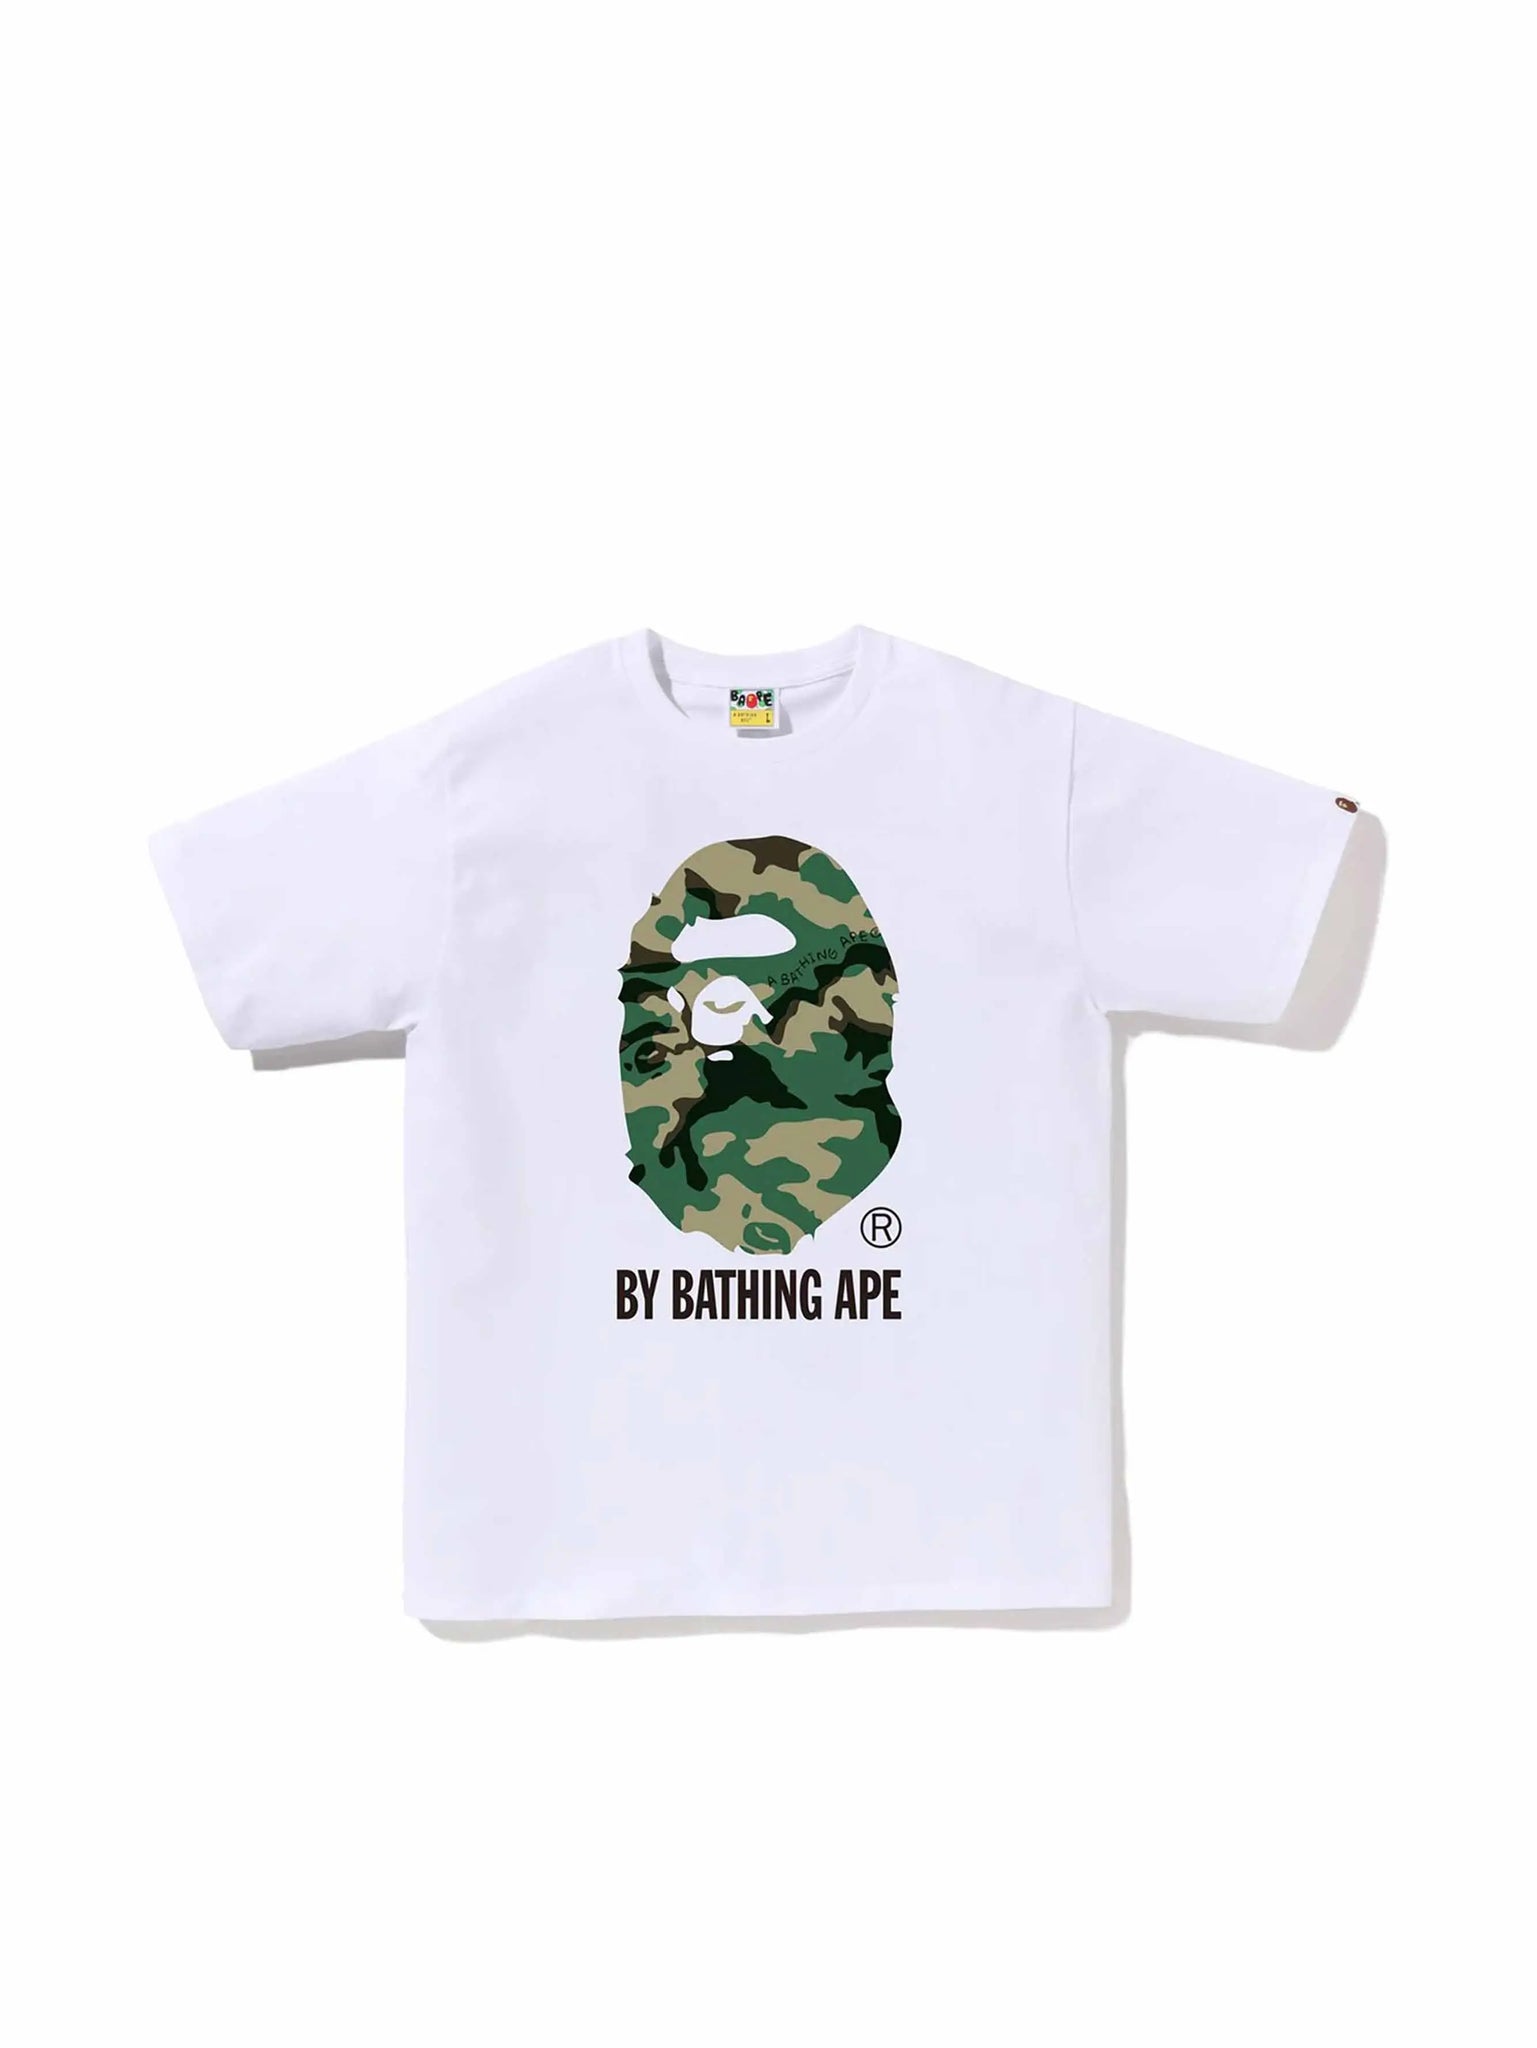 A Bathing Ape Woodland Camo By Bathing Ape Tee White in Auckland, New Zealand - Shop name